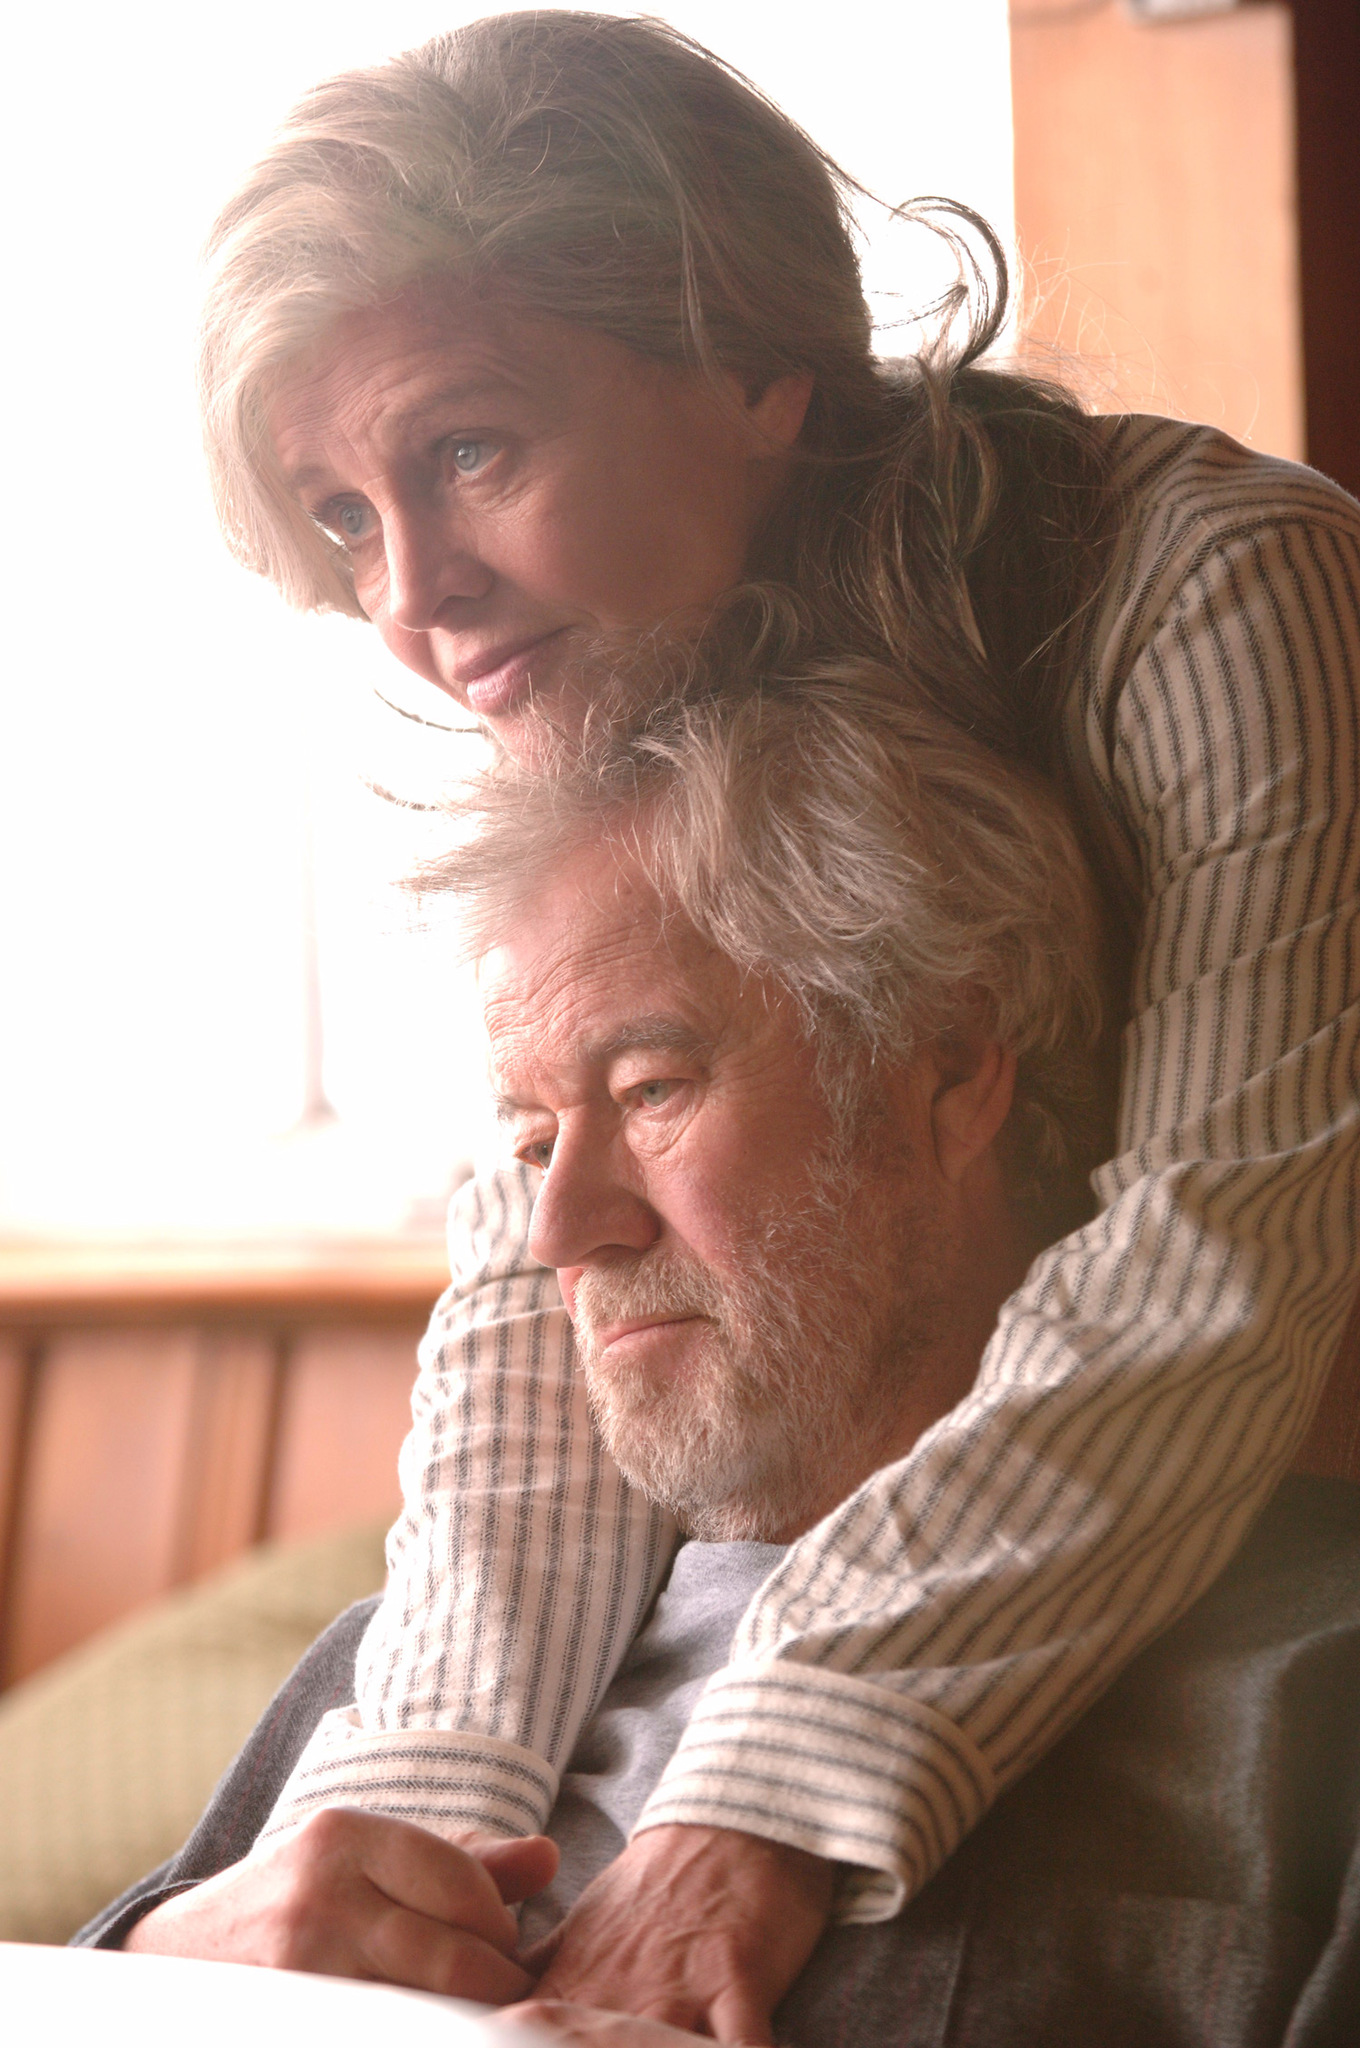 Still of Julie Christie and Gordon Pinsent in Away from Her (2006)